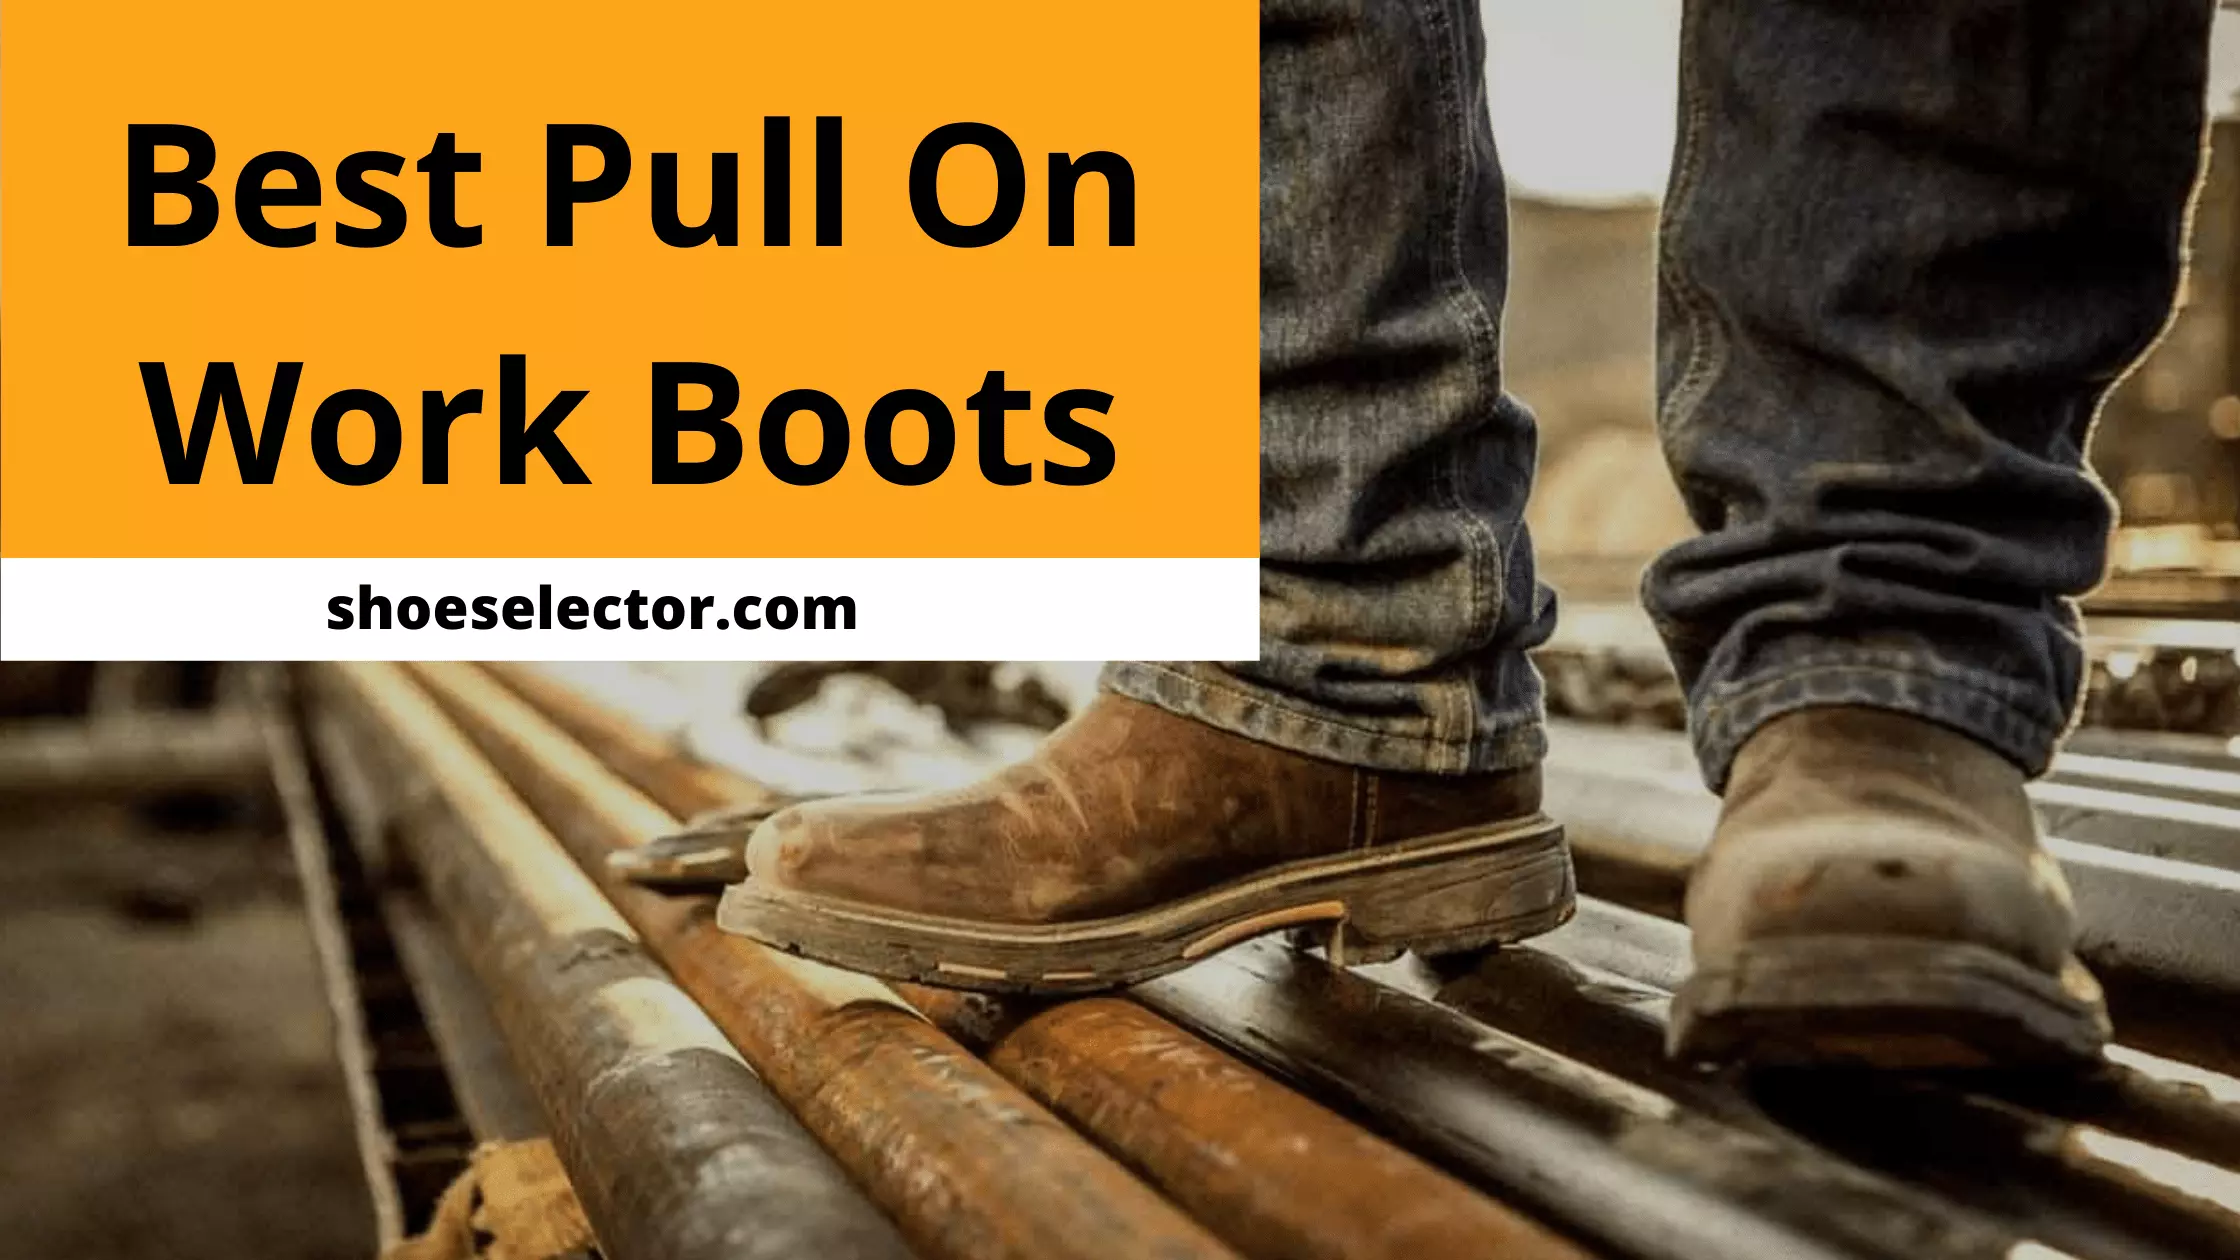 Best Pull On Work Boots -  Top Expert's Choice